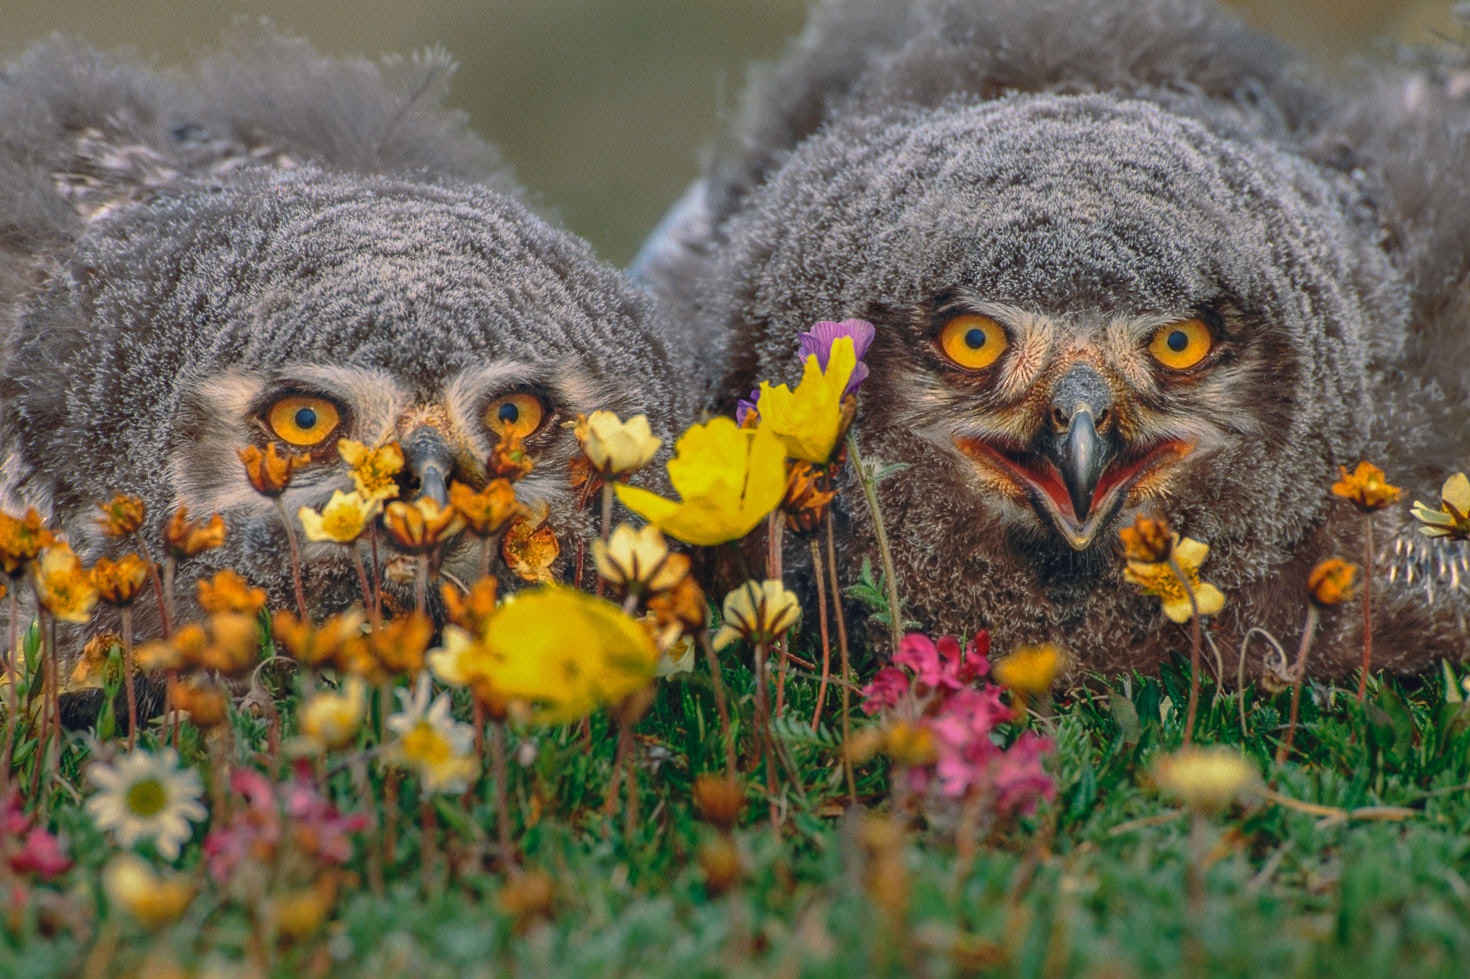 A pair of snowy owlets in Alaska's Arctic National Wildlife Refuge © Art Wolfe